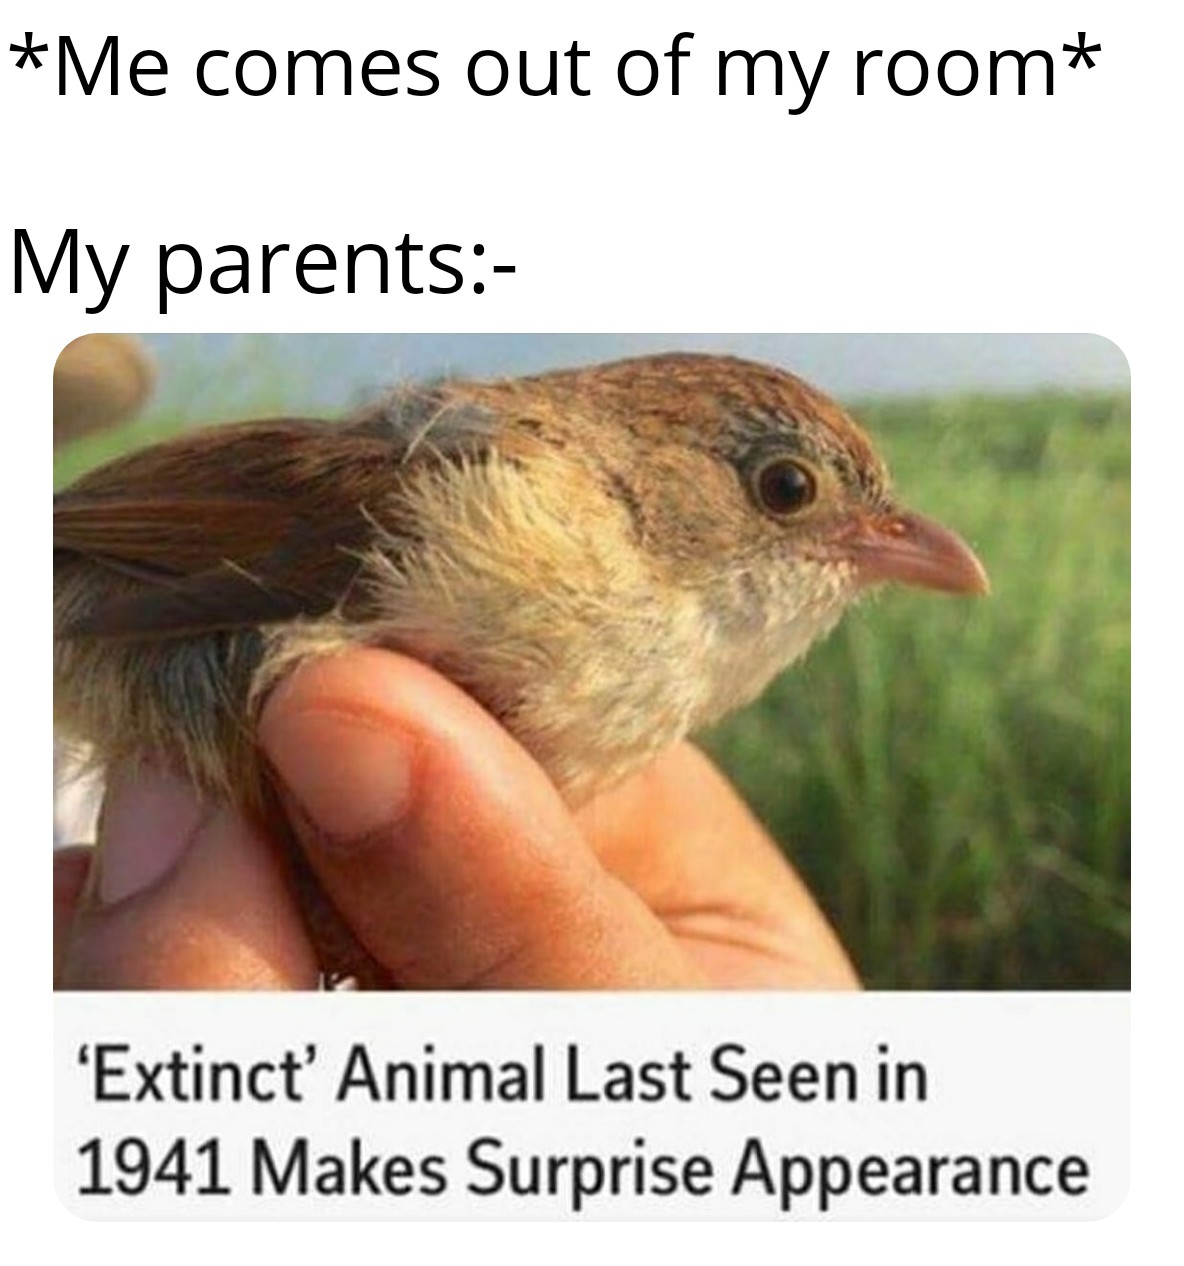 funny memes and pics - jerdon's babbler - Me comes out of my room My parents 'Extinct' Animal Last Seen in 1941 Makes Surprise Appearance